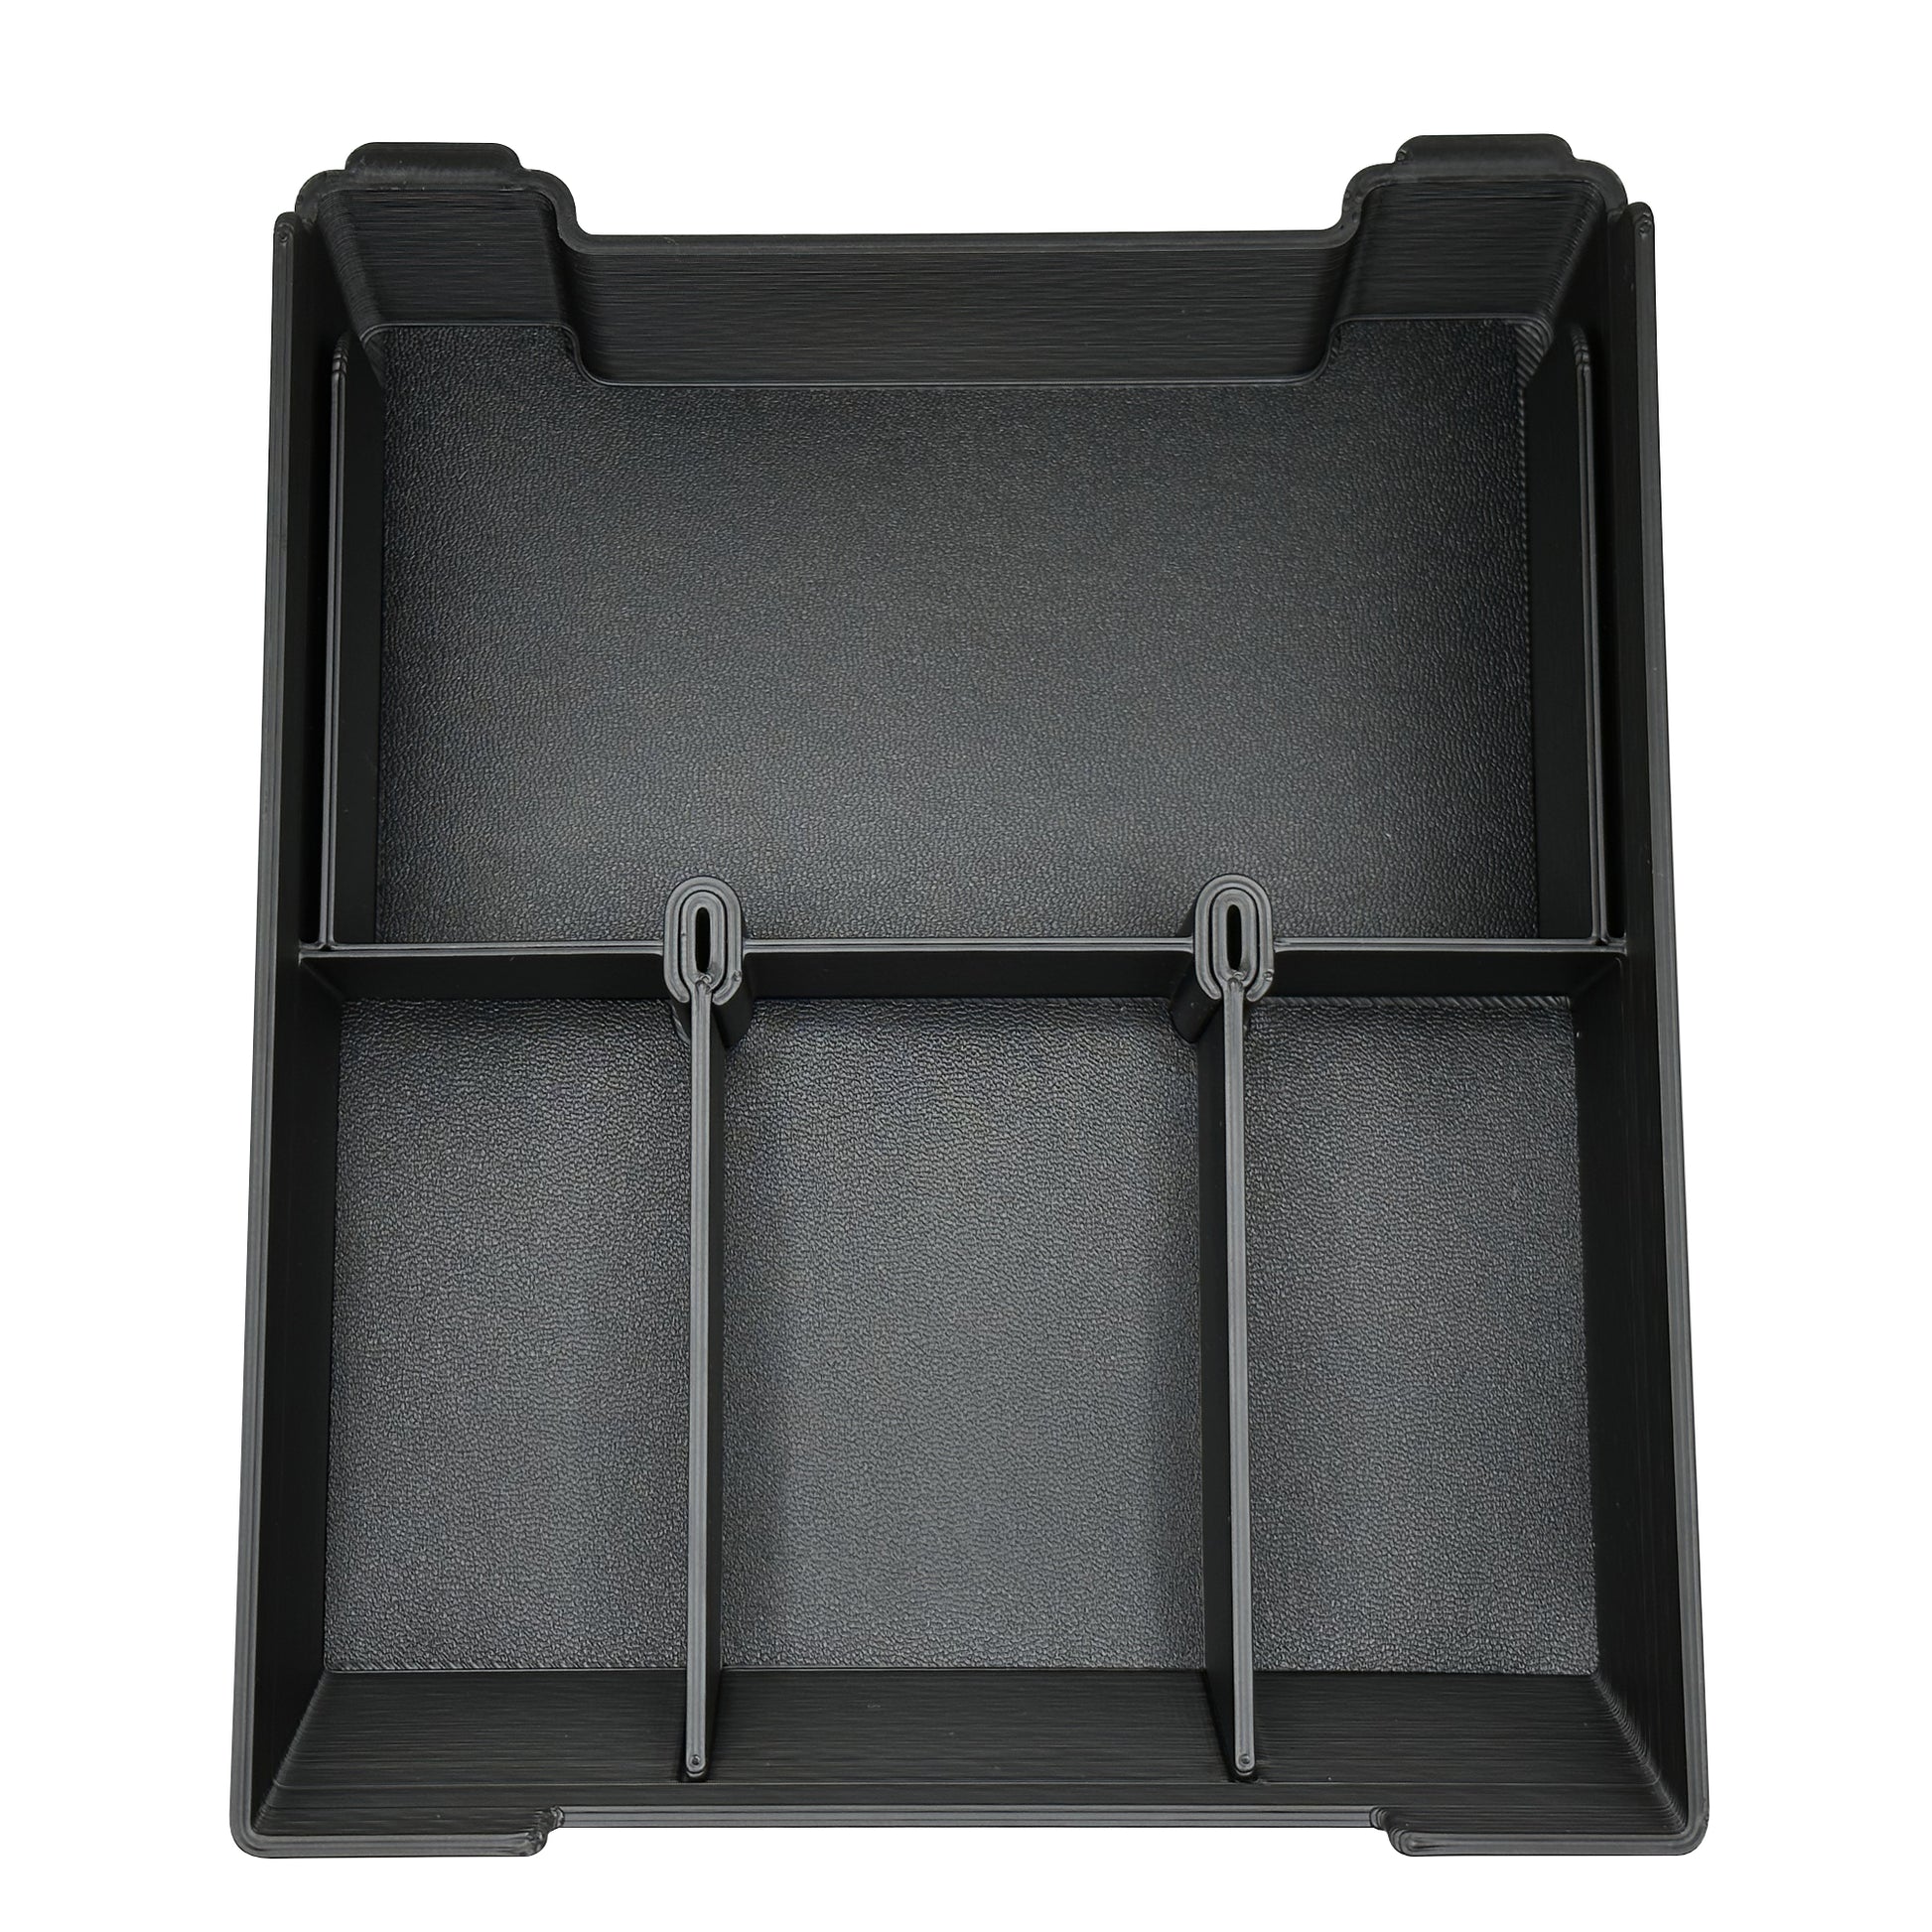 Armrest/Console Organizer Tray for Rivian R1T/R1S – TWRAPS